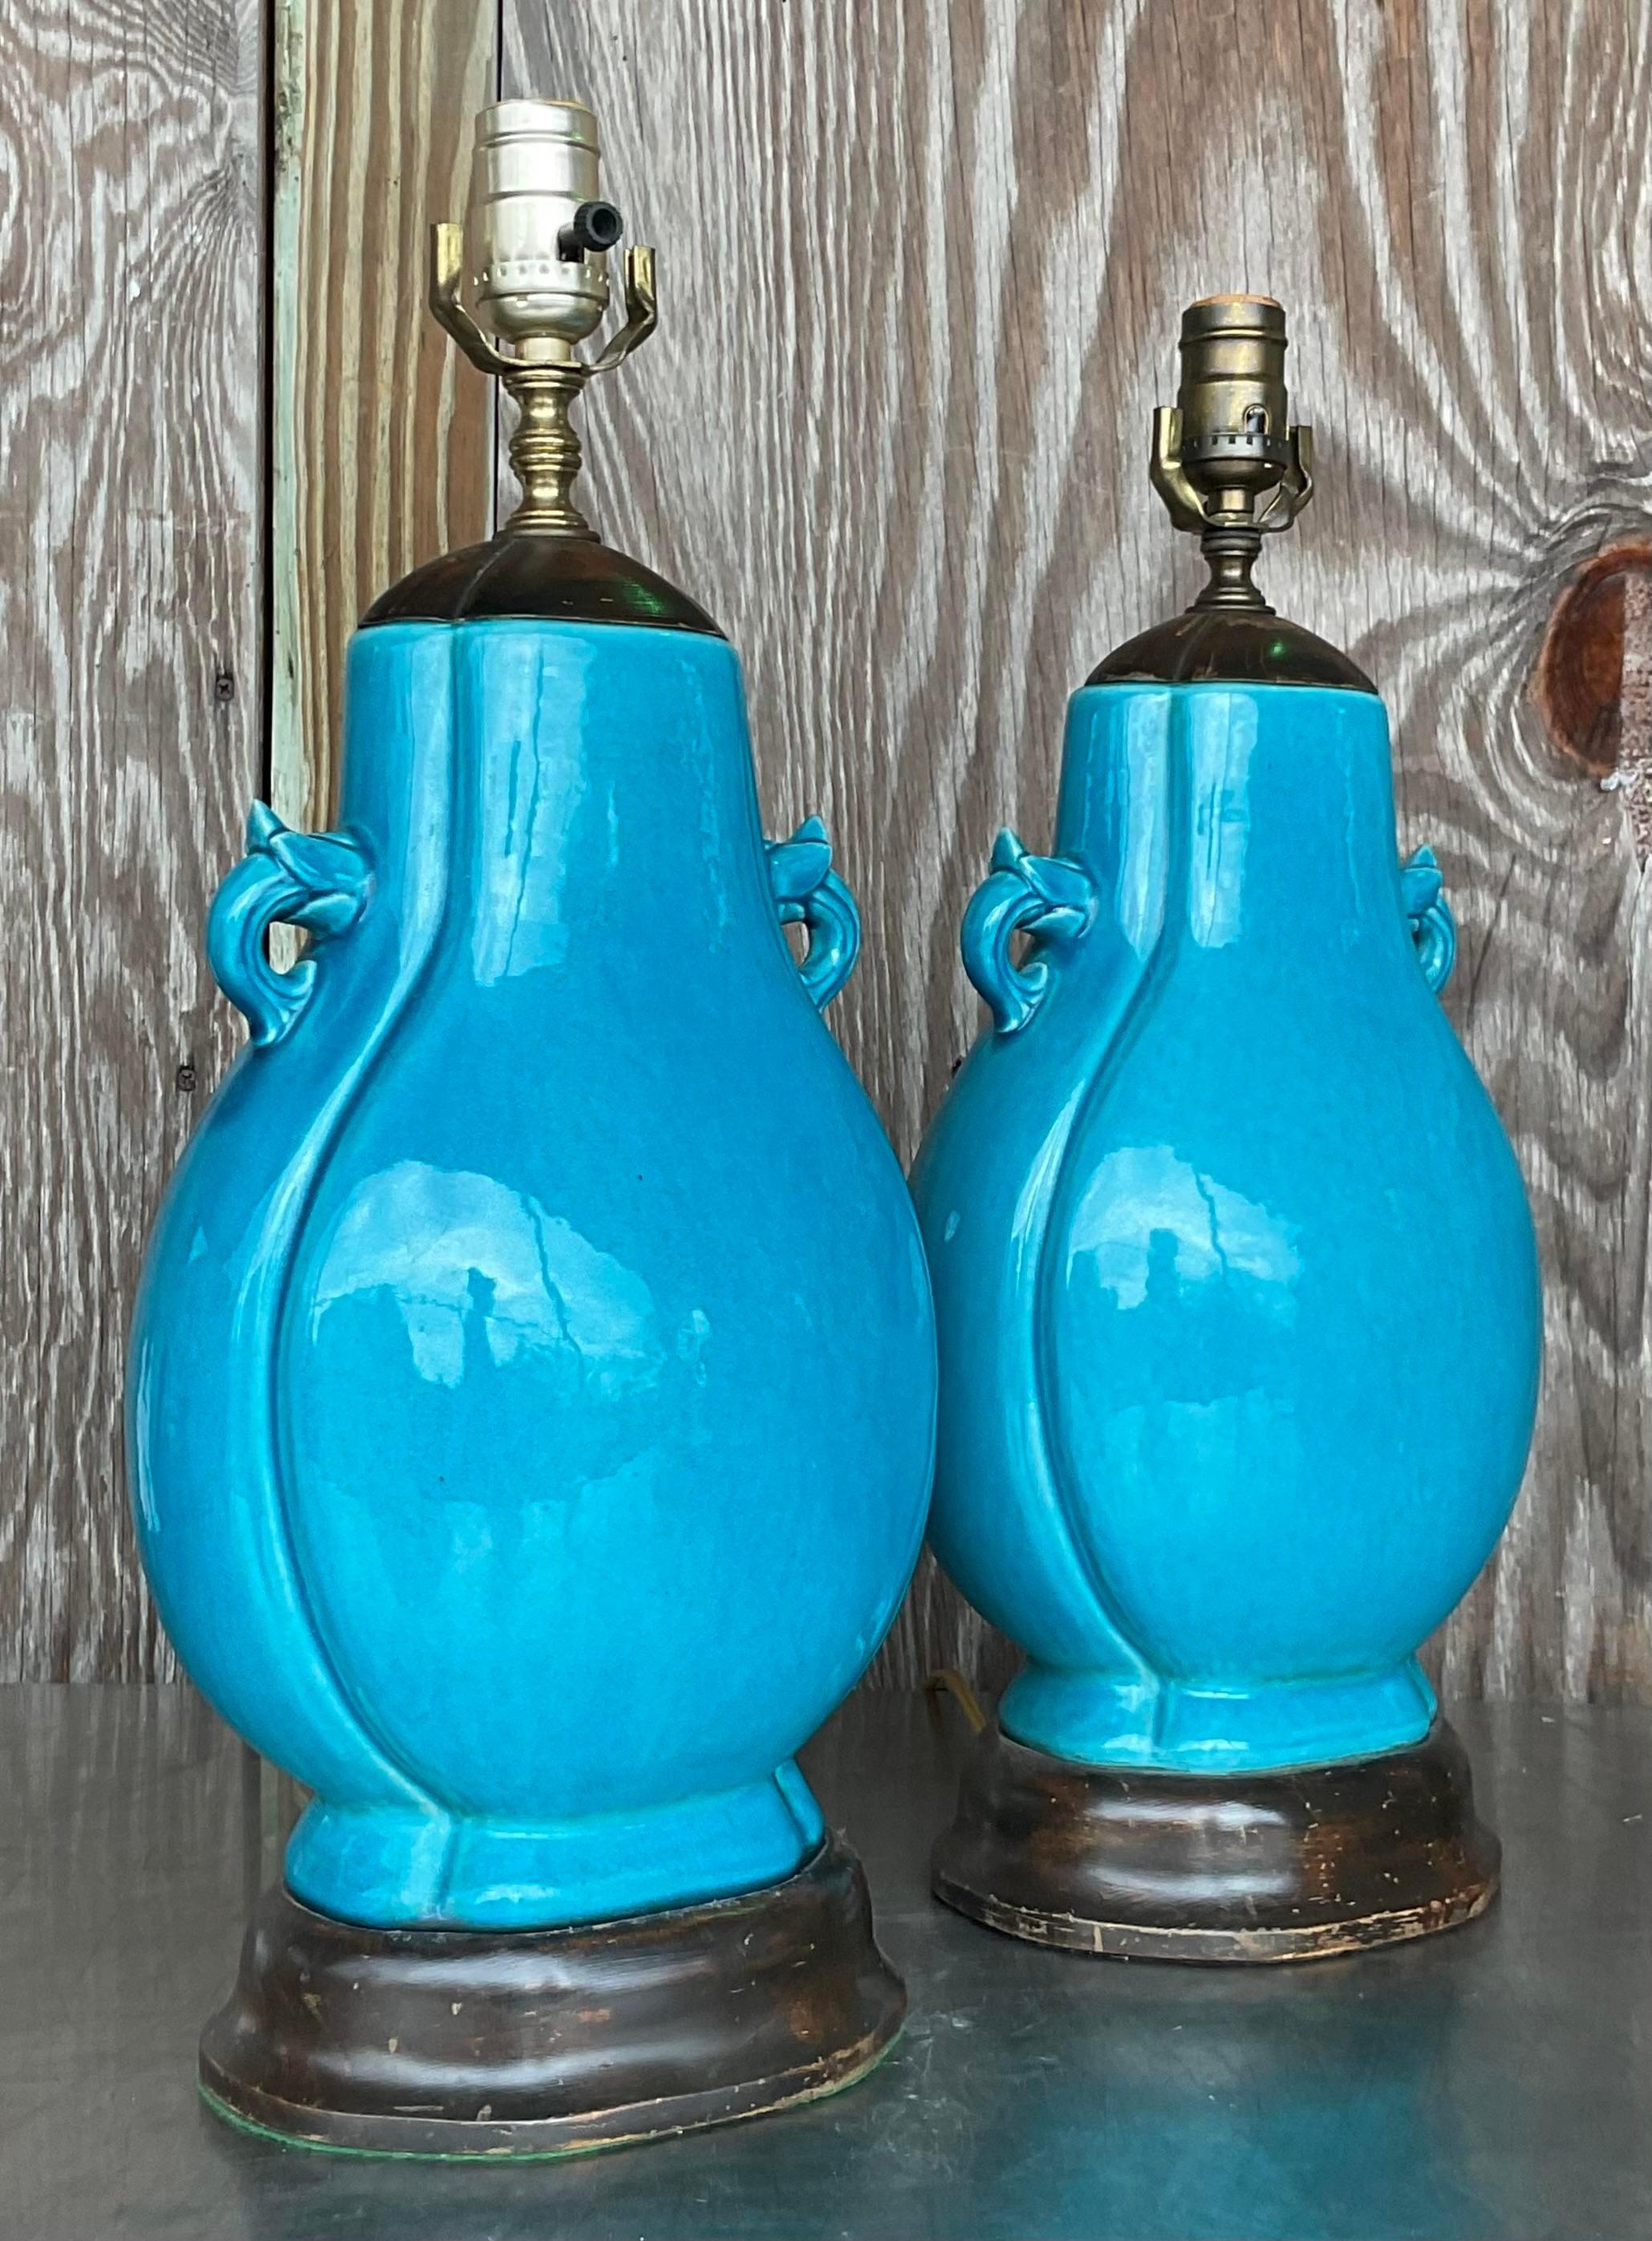 Vintage Boho Turquoise Glazed Ceramic Moonflask Table Lamps - a Pair For Sale 1